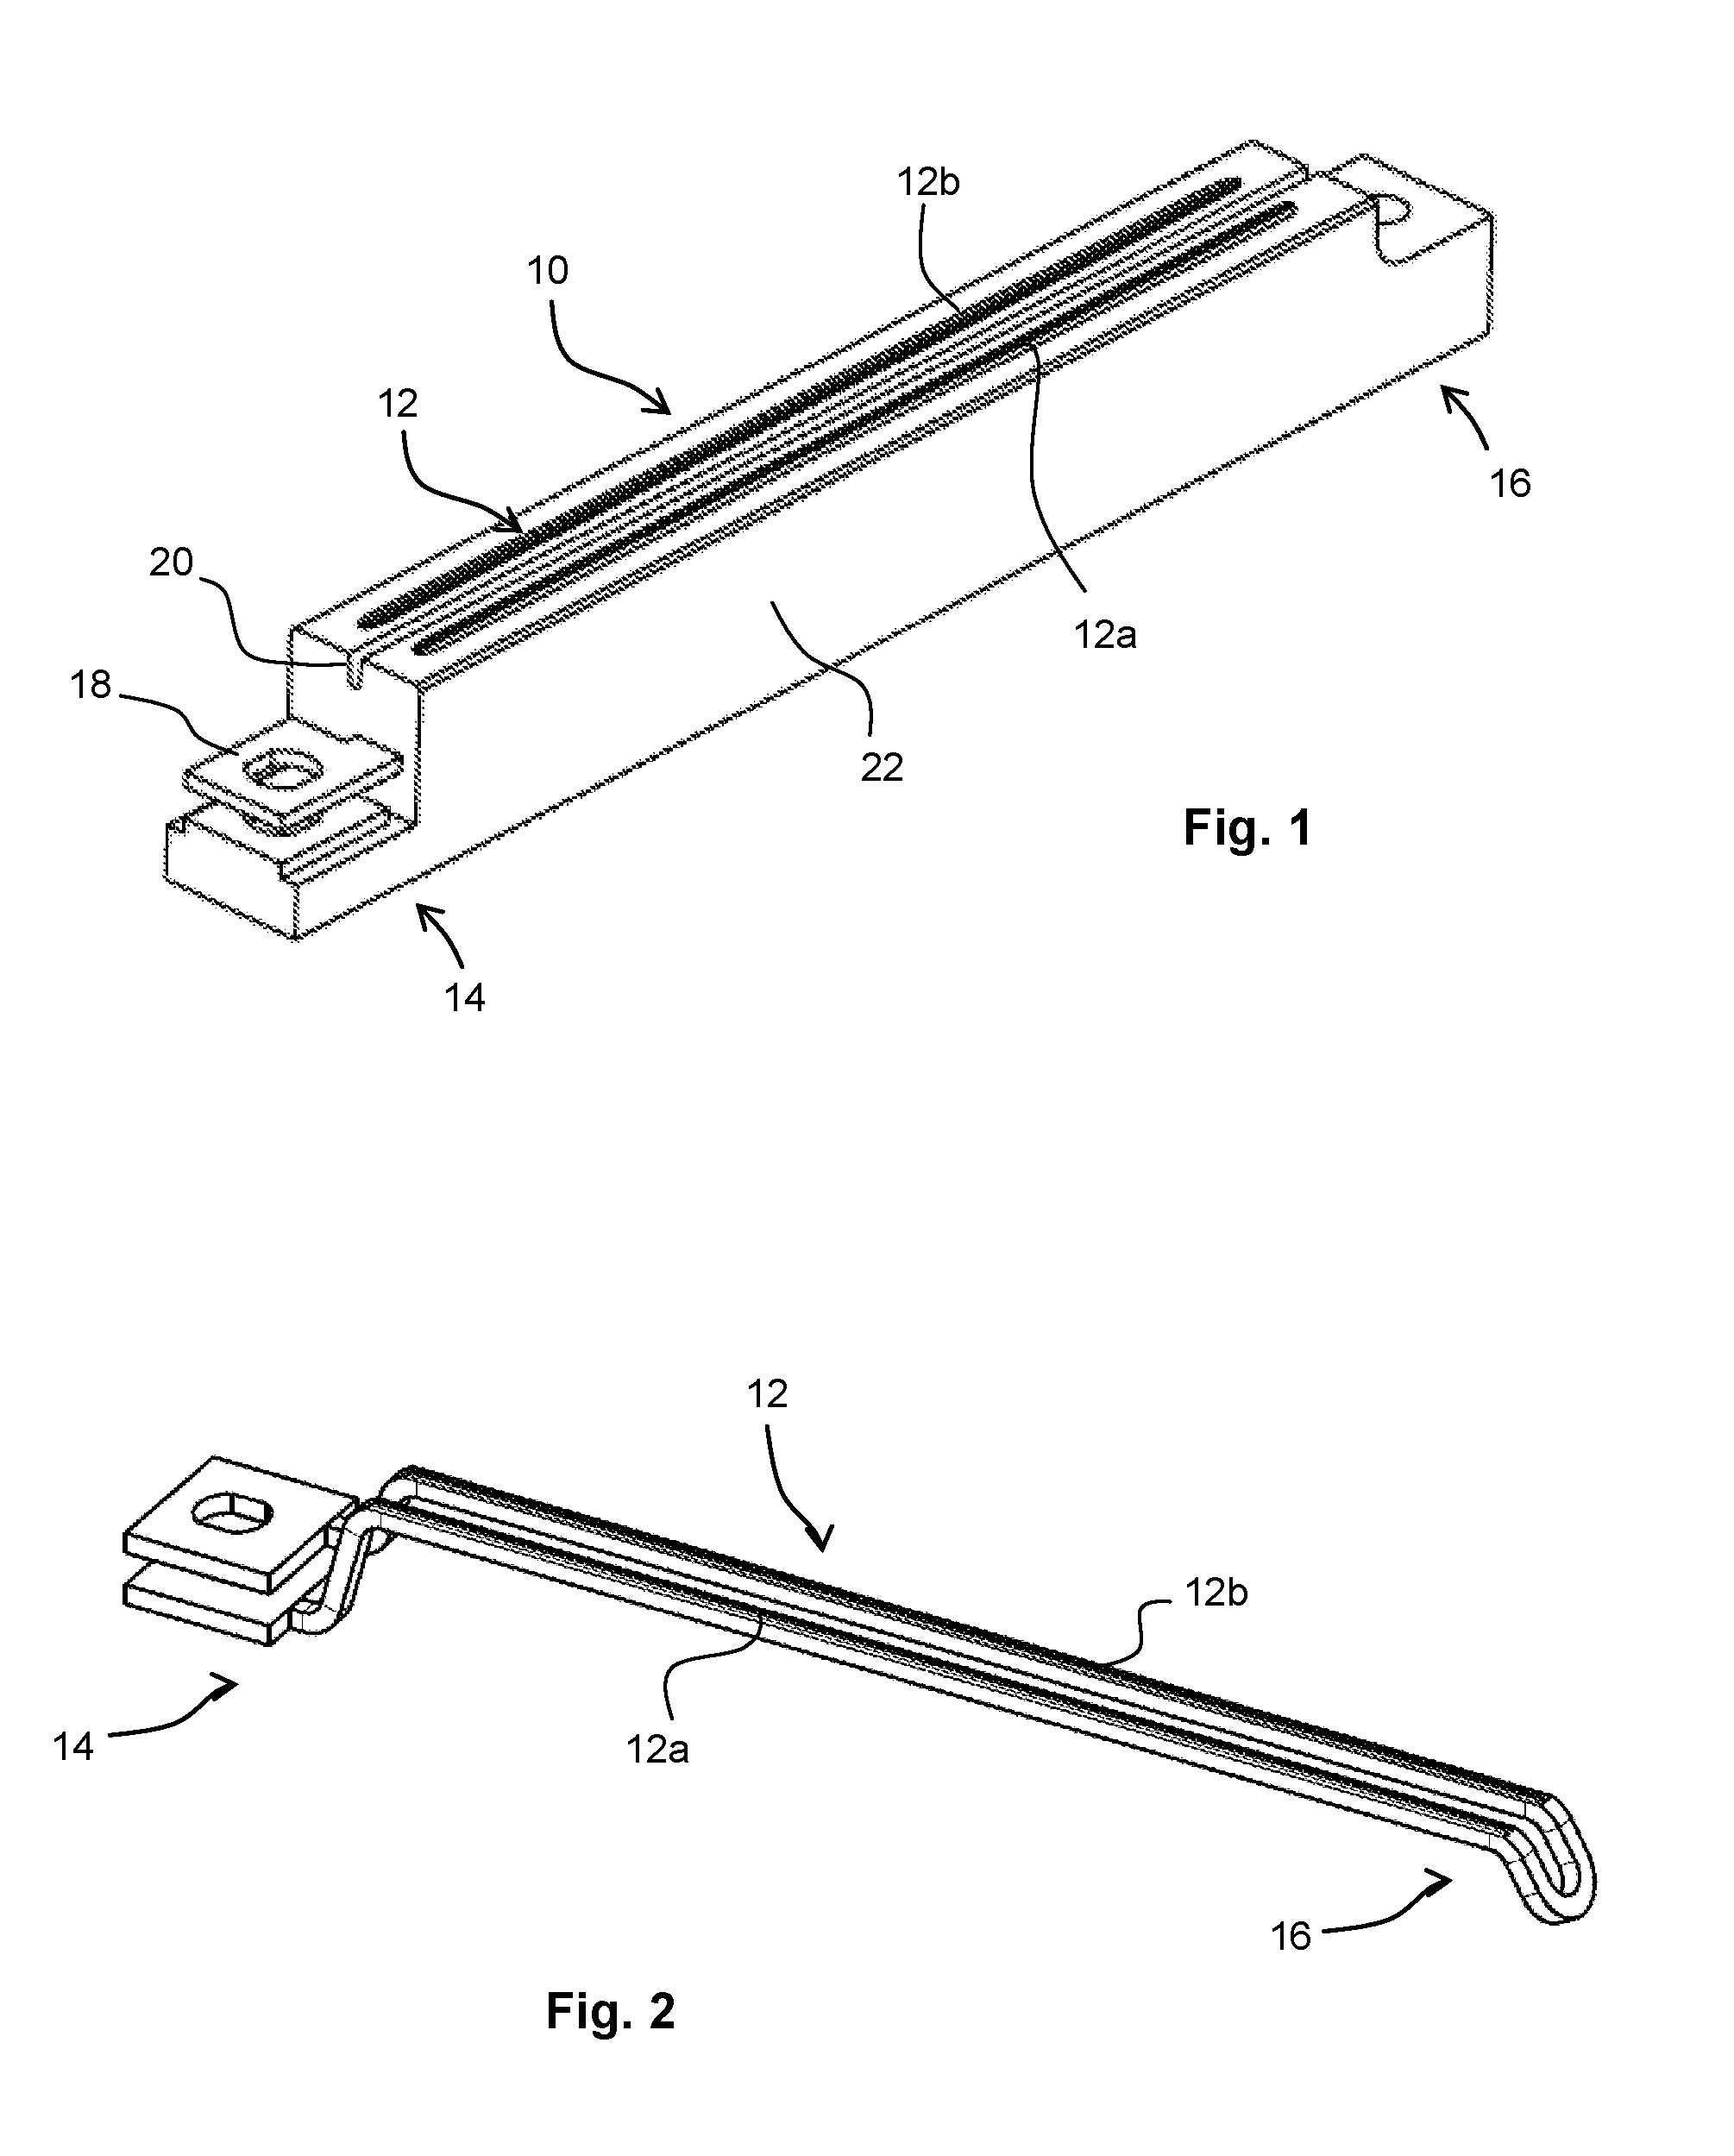 Induction sealing device and method for manufacturing an induction sealing device